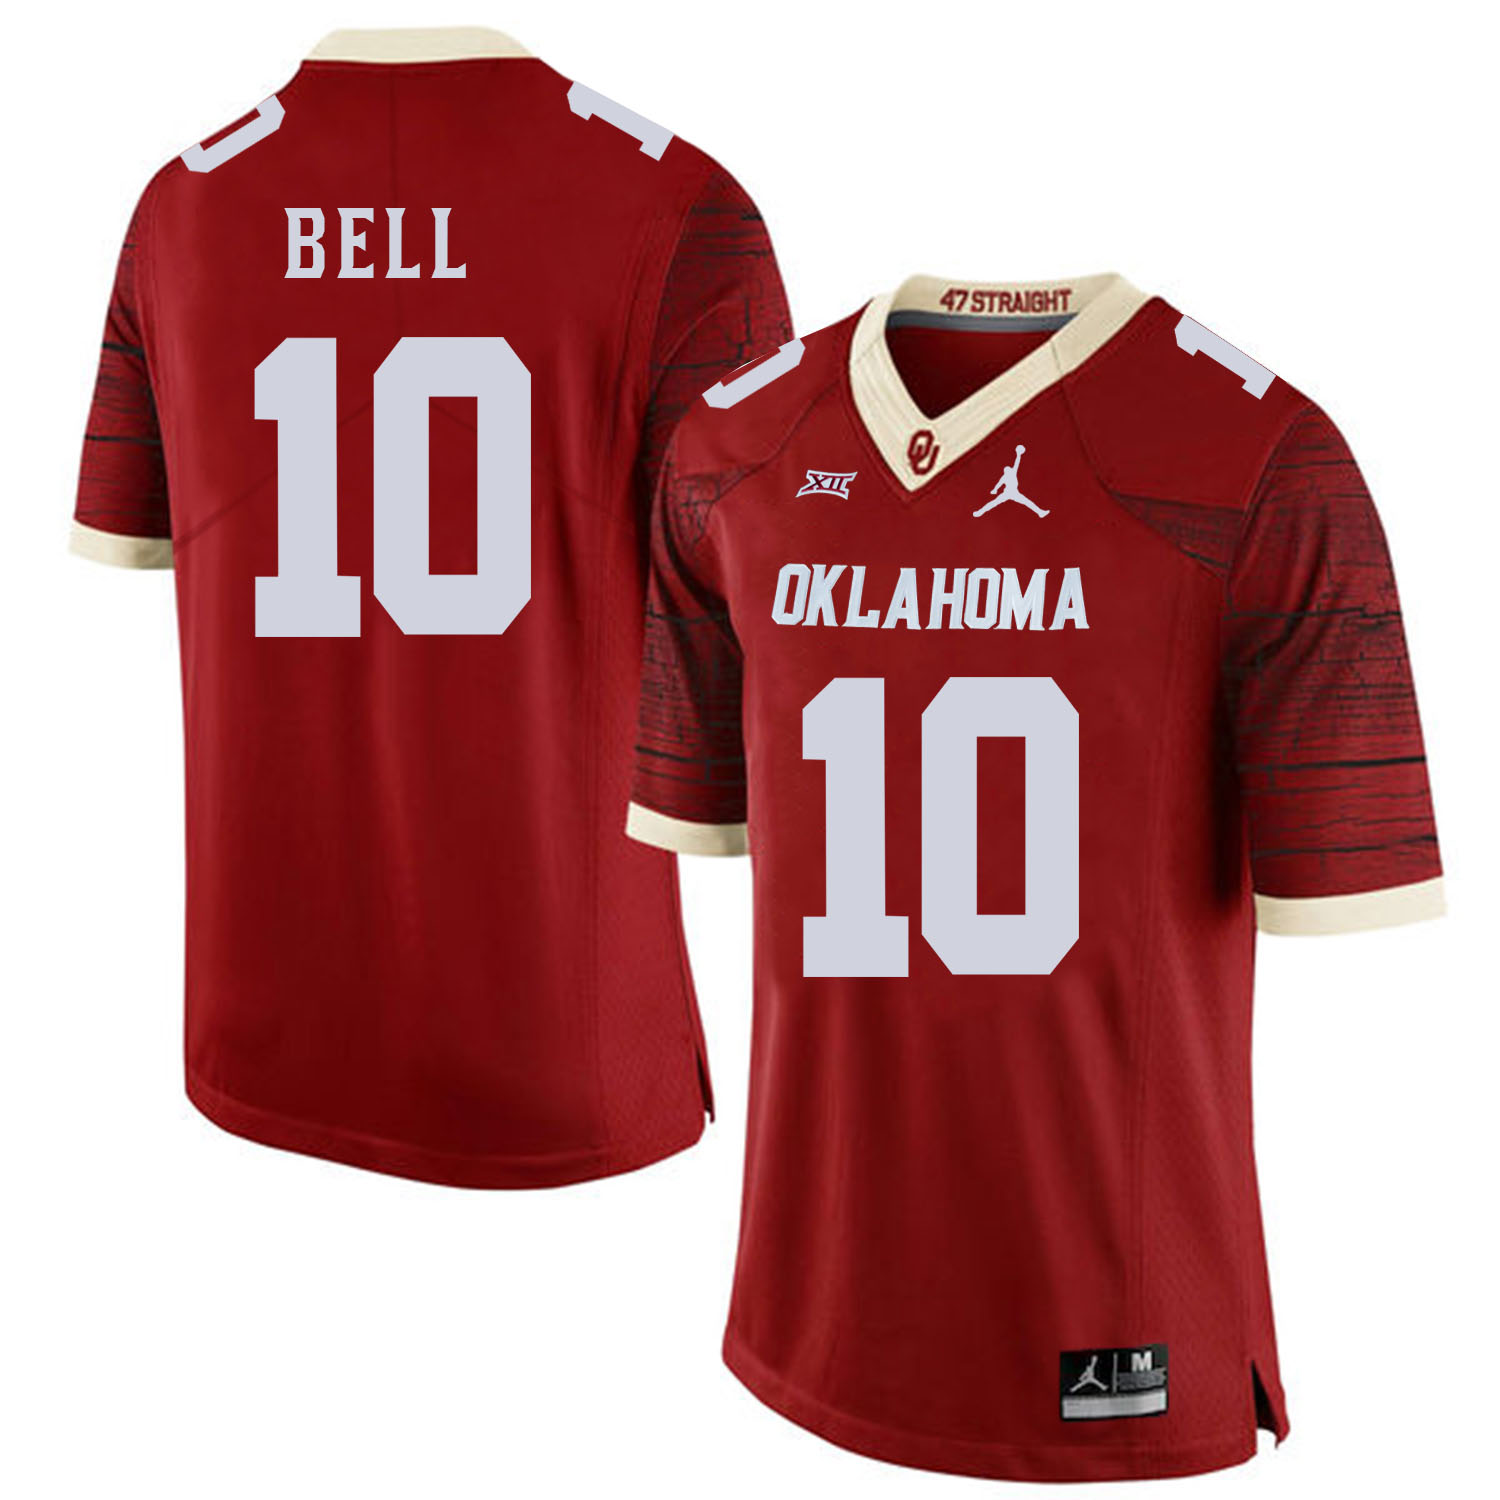 Oklahoma Sooners 10 Blake Bell Red 47 Game Winning Streak College Football Jersey - Click Image to Close